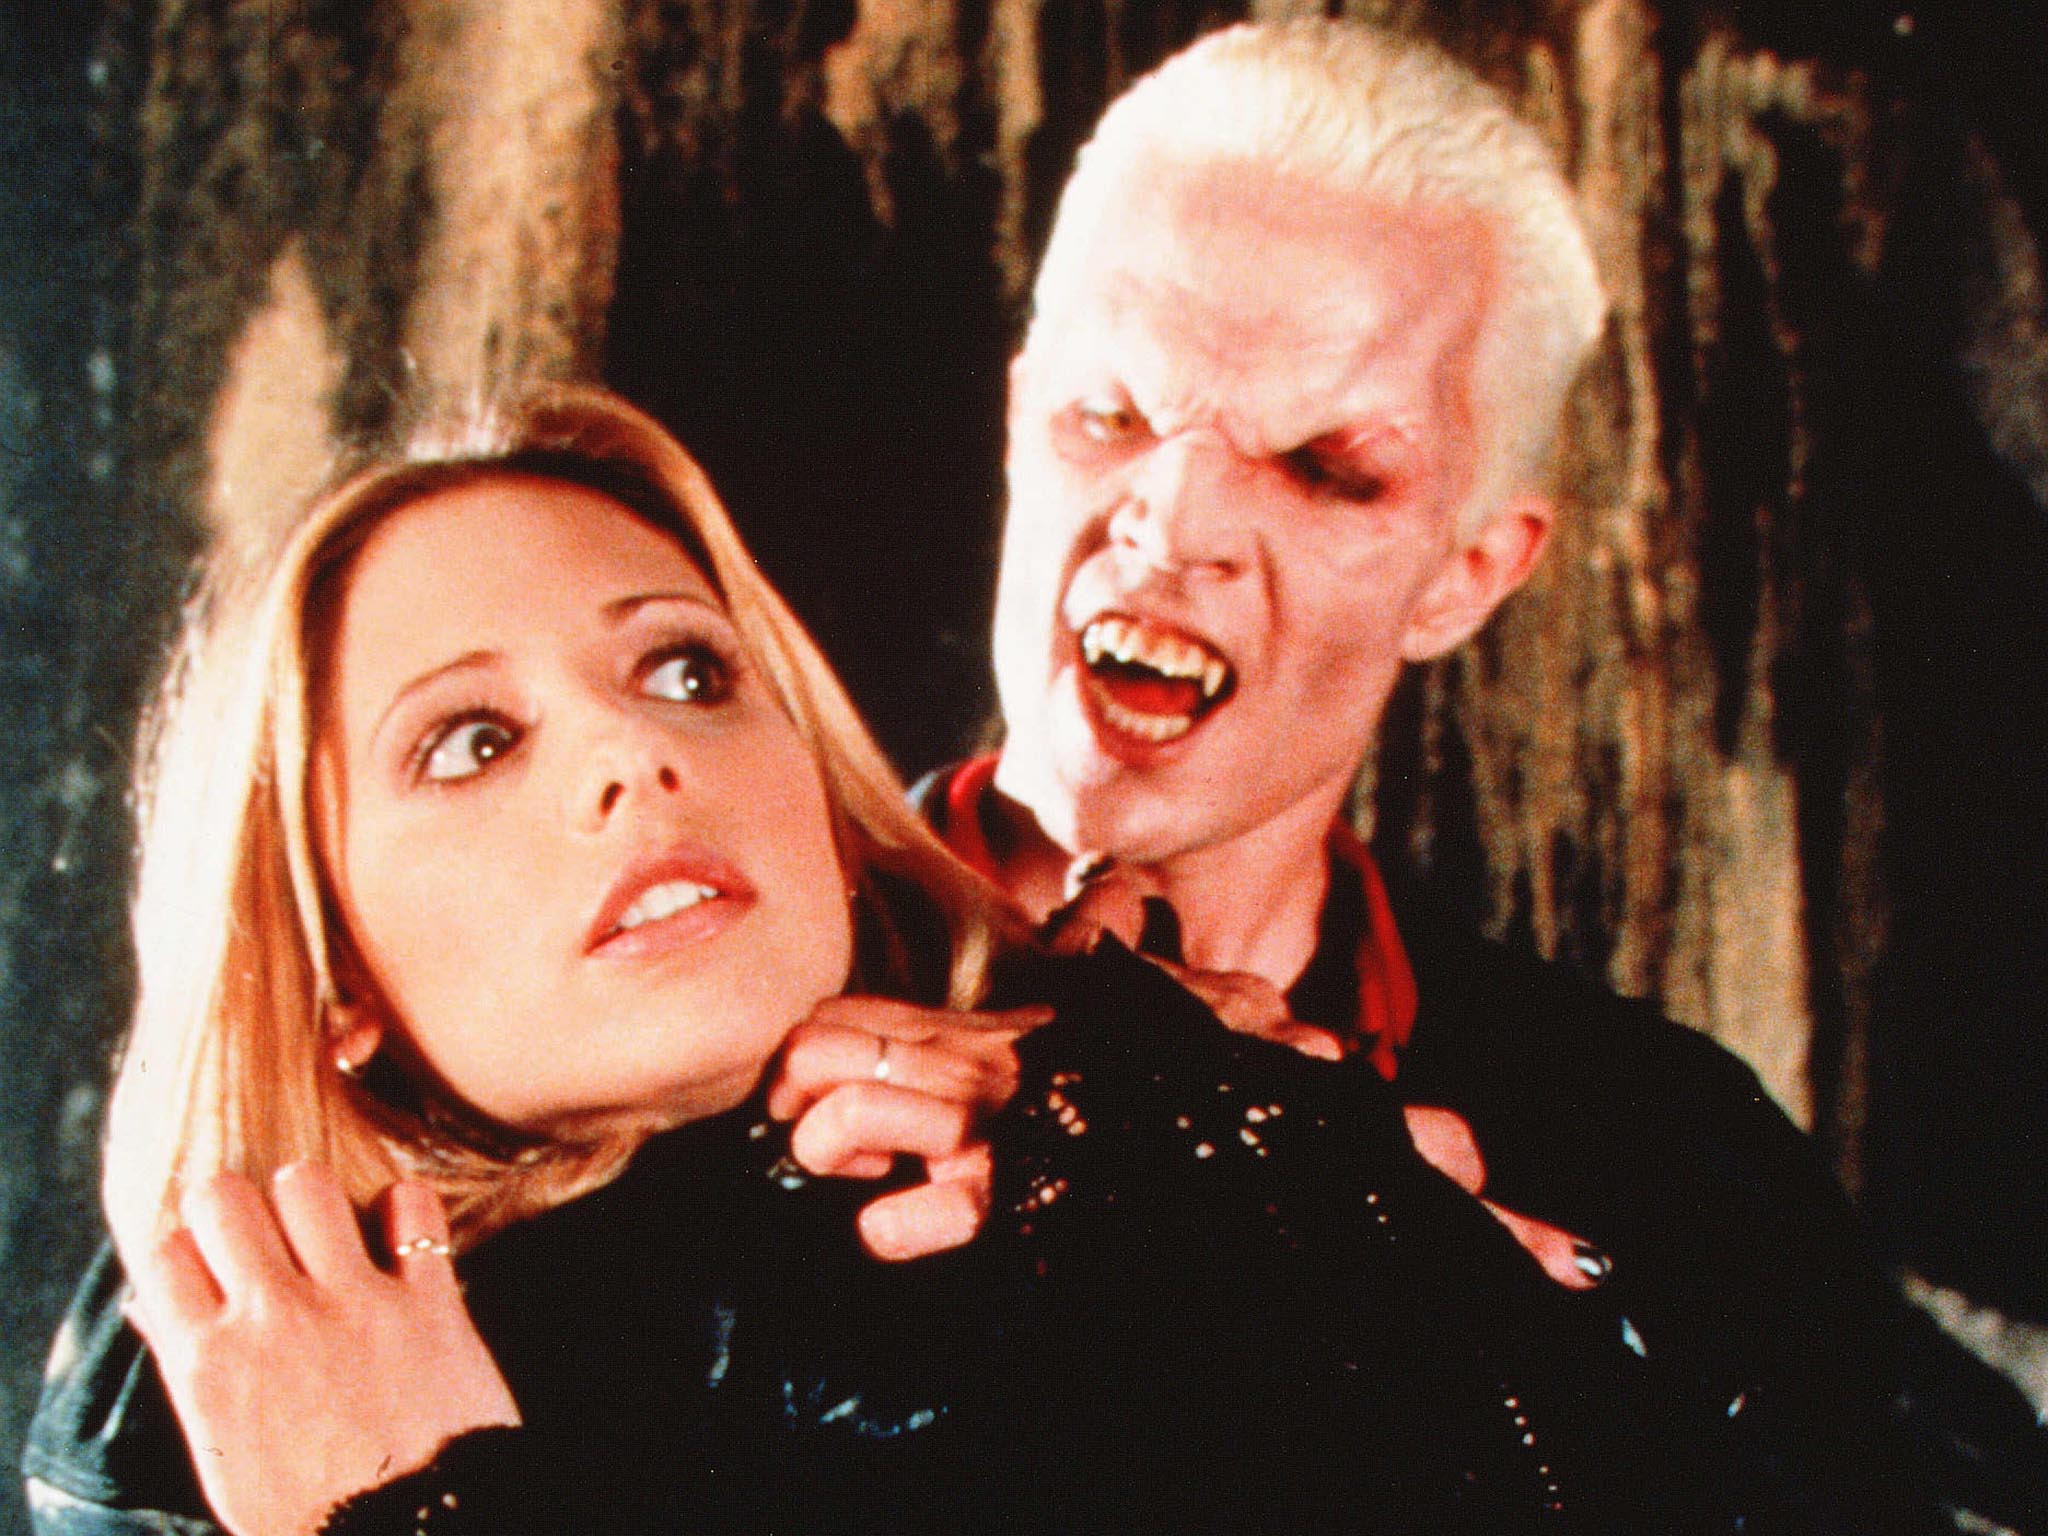 Sarah Michelle Gellar and James Marsters in Buffy the Vampire Slayer